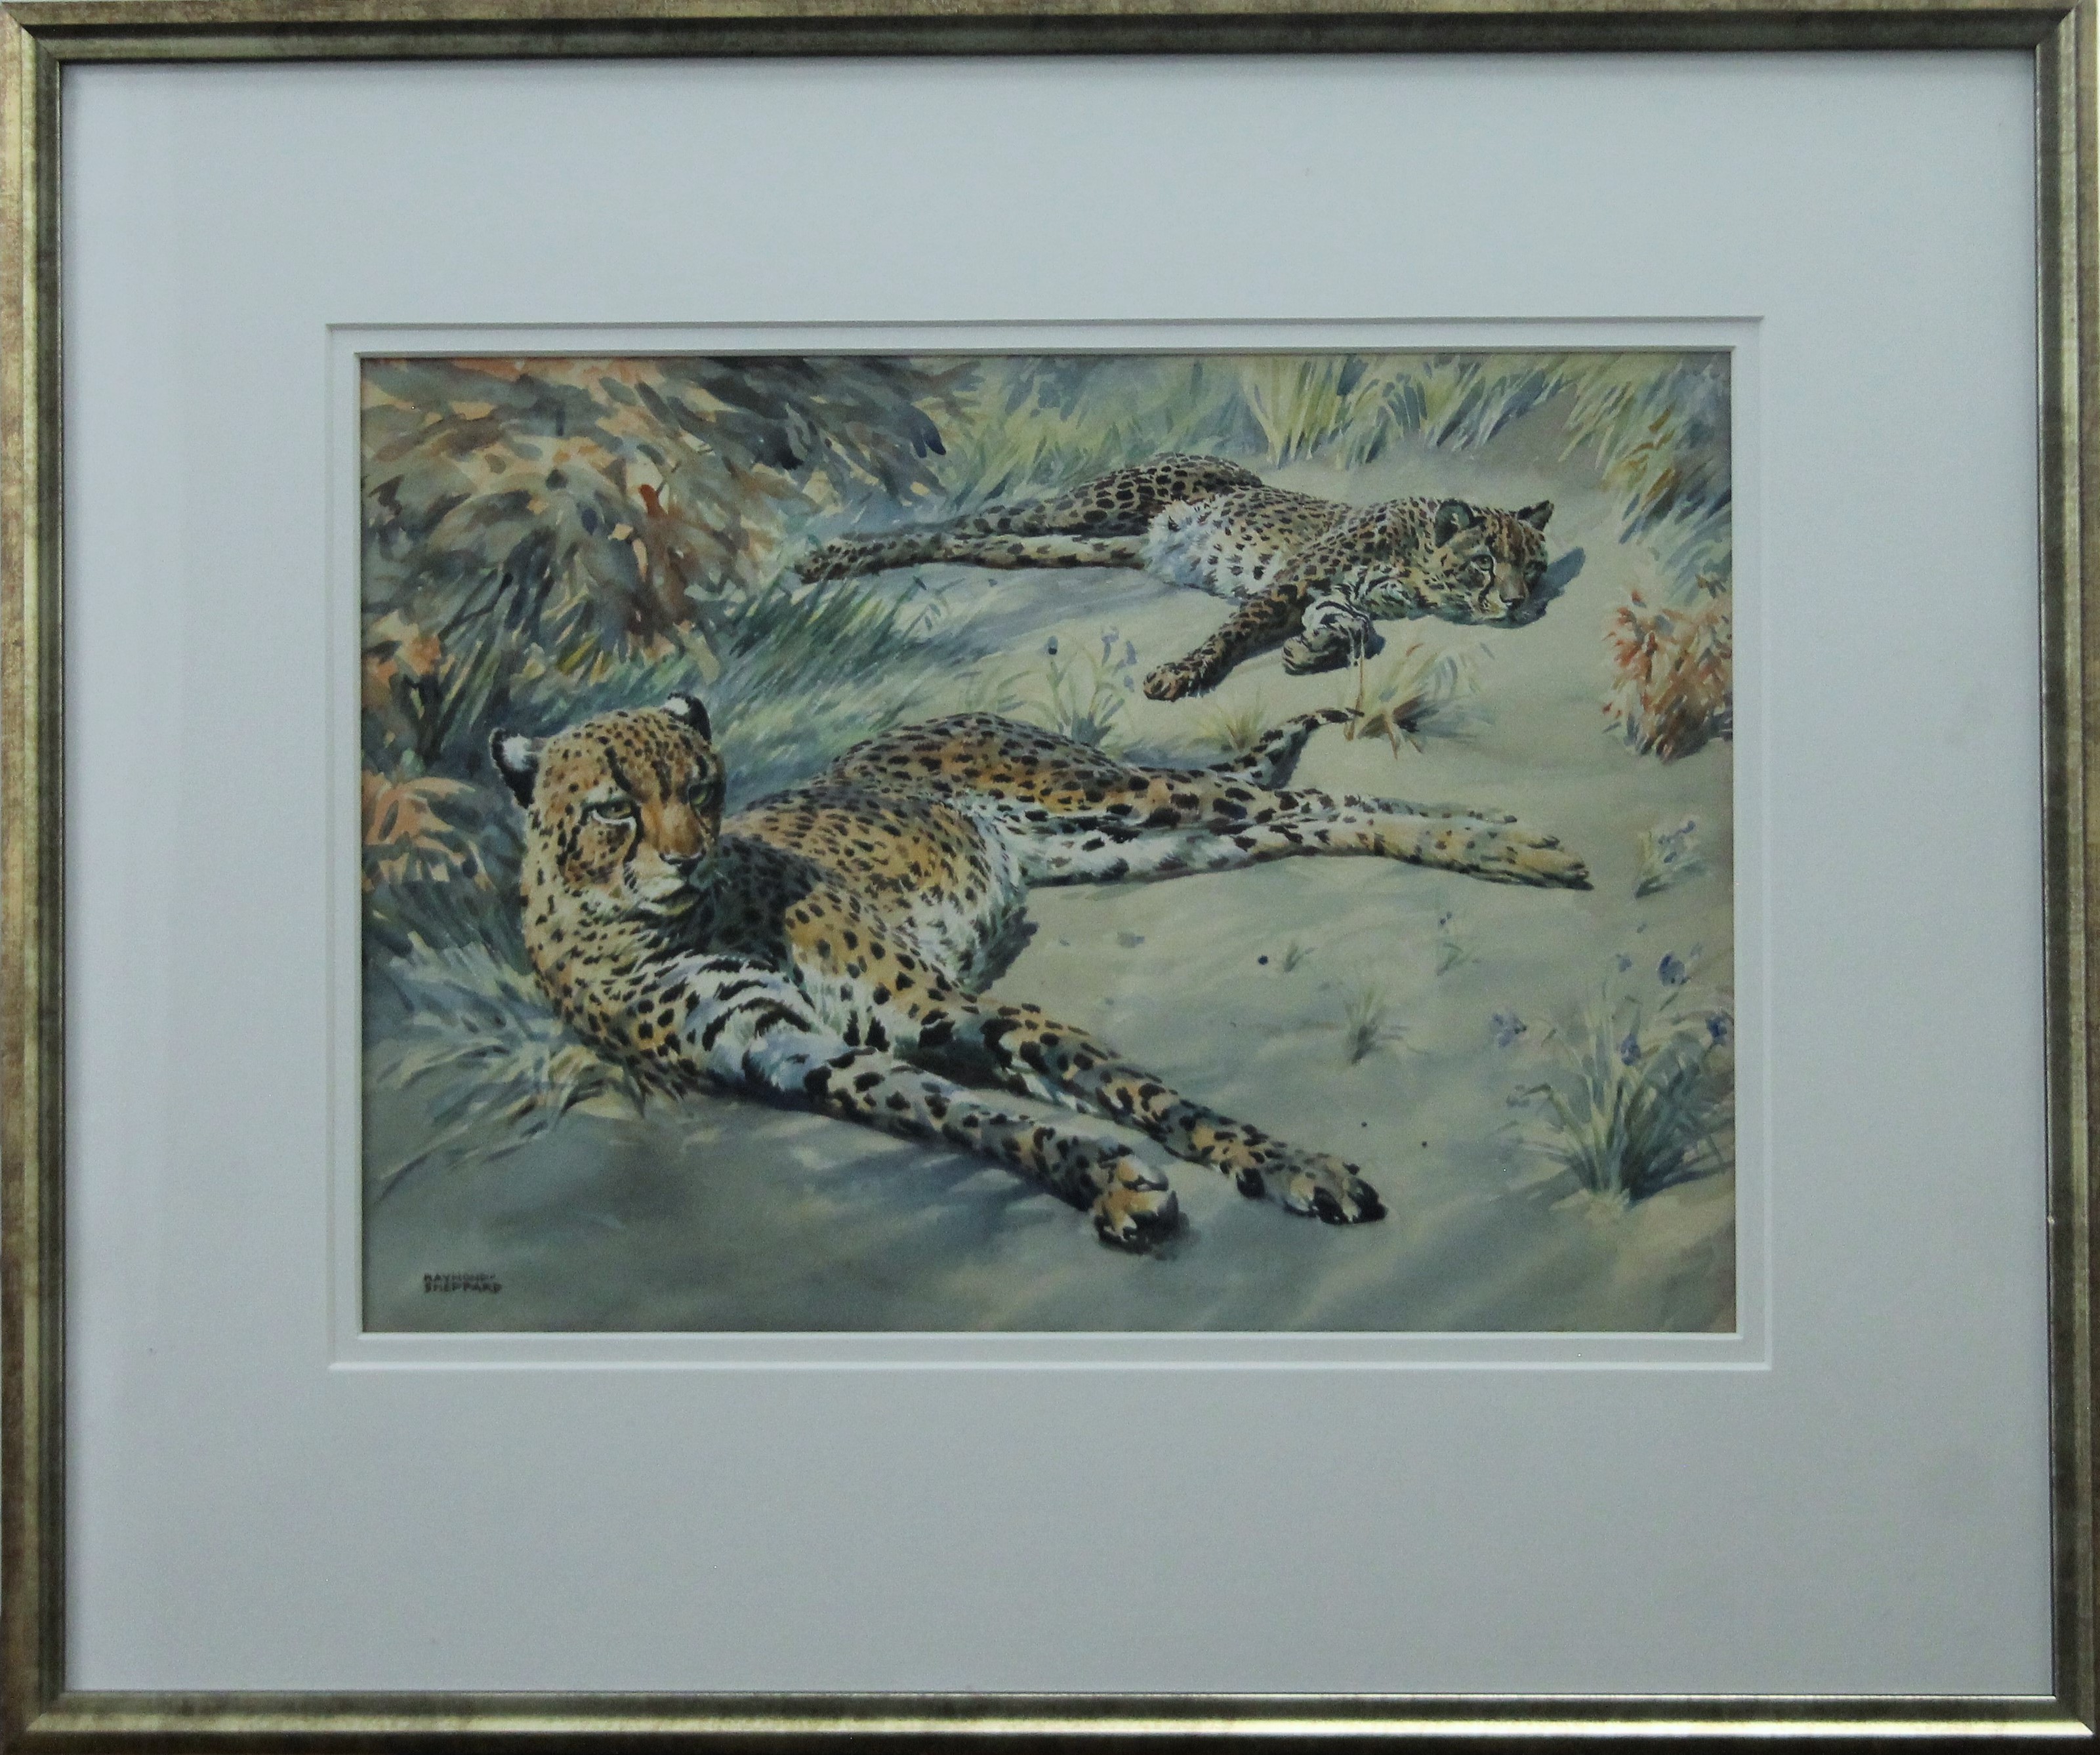 SHEPPARD, RAYMOND (1913-1958) British (AR), Cheetahs, watercolour, signed, framed and glazed. - Image 2 of 3